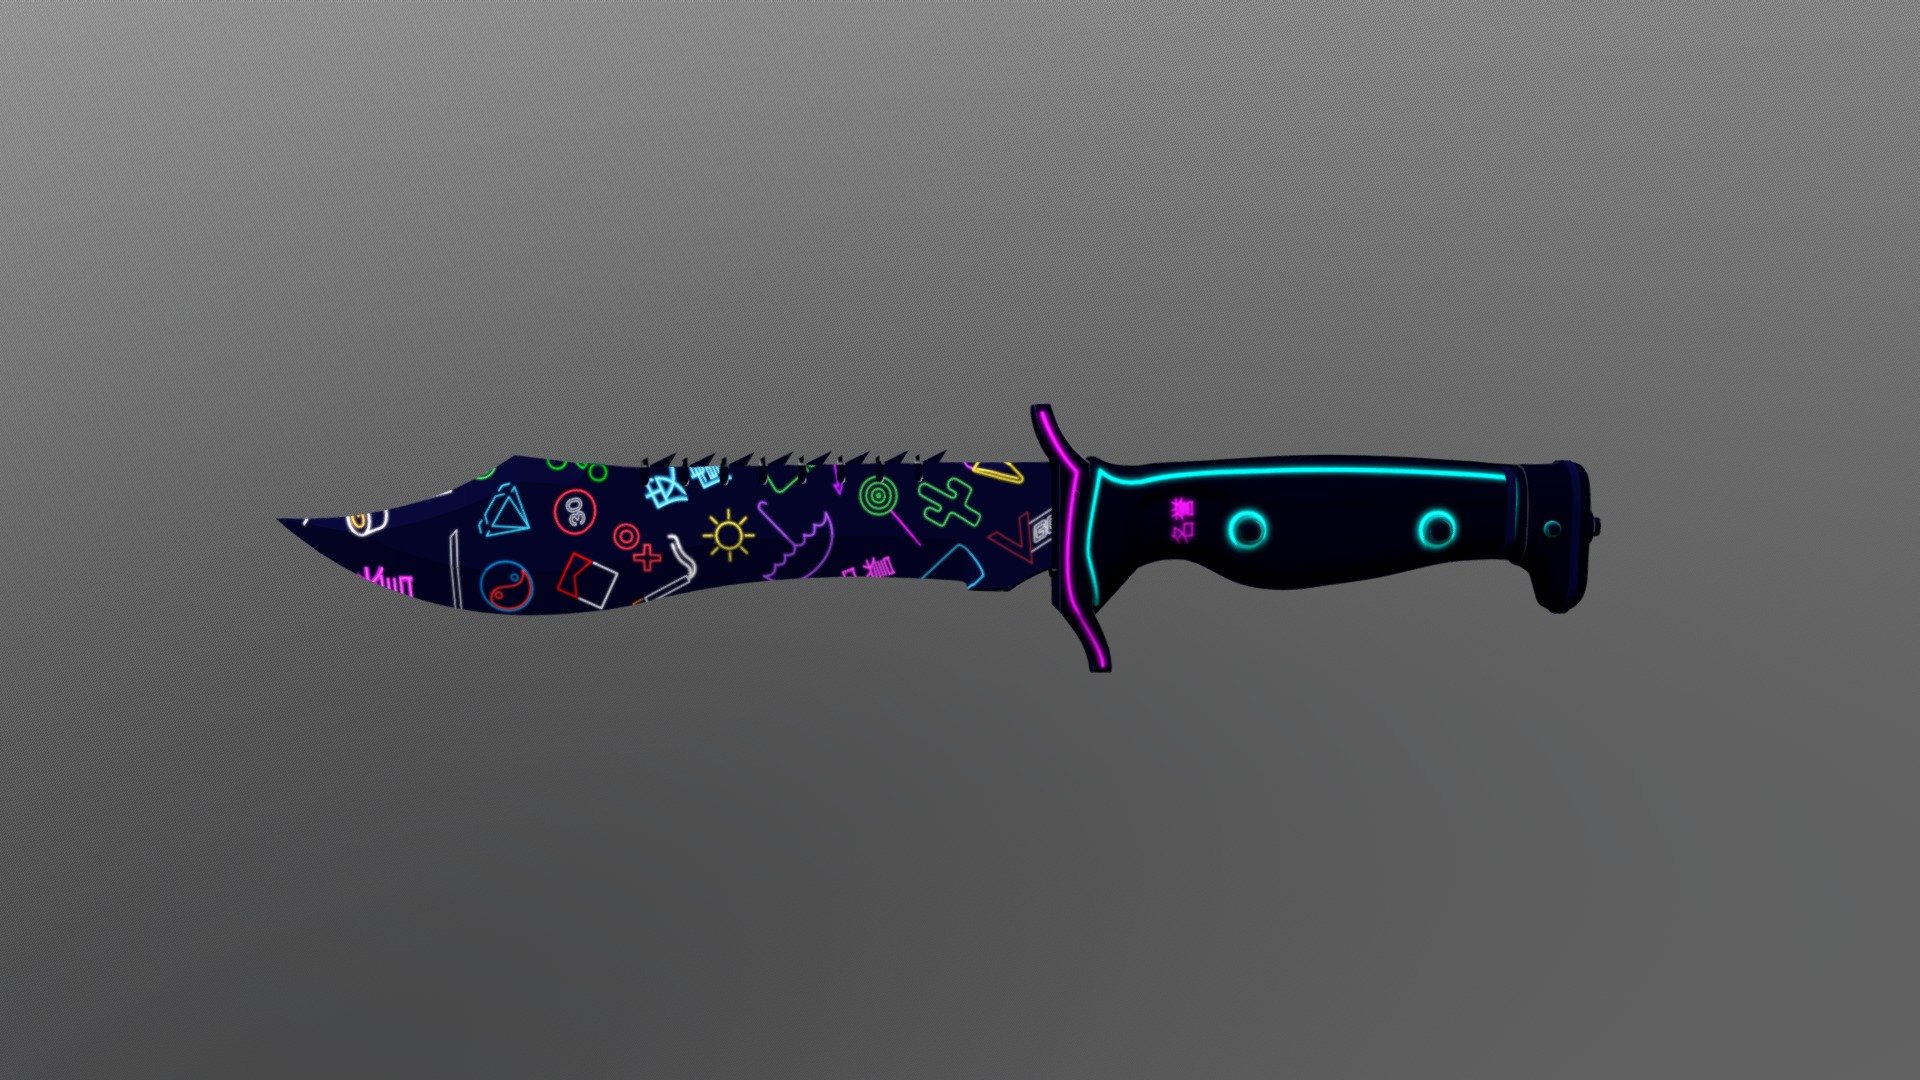 Bowie Knife | Japanese Neons

Submission for #VGODesign contest by VGO.gg

Made by twitter.com/vncidesign - Bowie Knife | Japanese Neons - 3D model by vnci 3d model